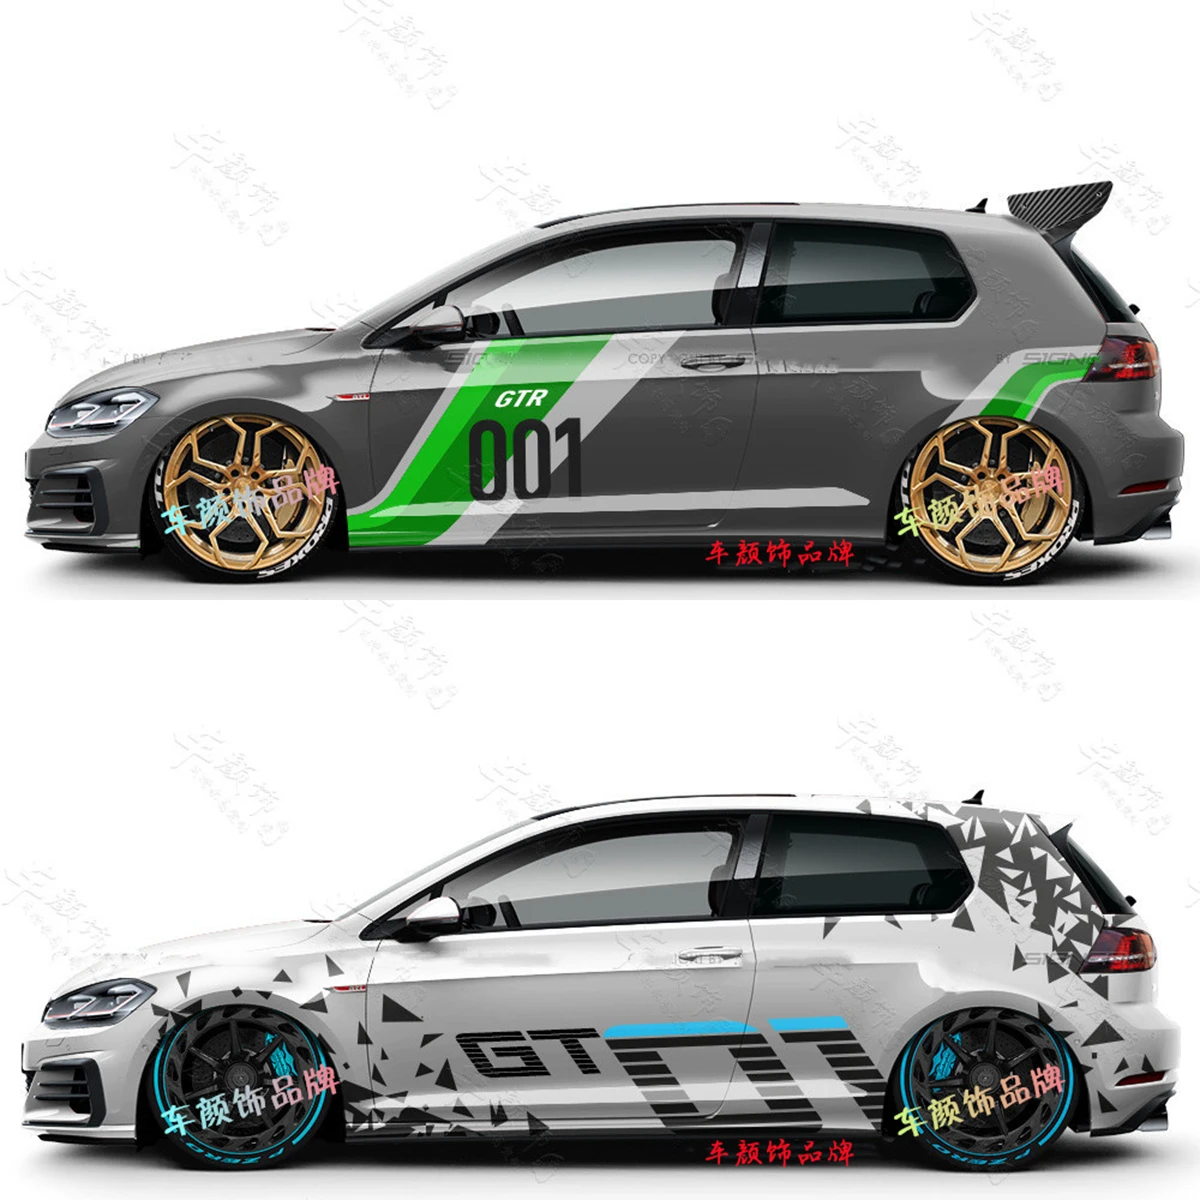 JDM Car Stickers For Volkswagen Golf 4 5 6 7 TSI TCR Polo Racing Decal  Exterior Details Stickers Car AccessoriesCar Goods